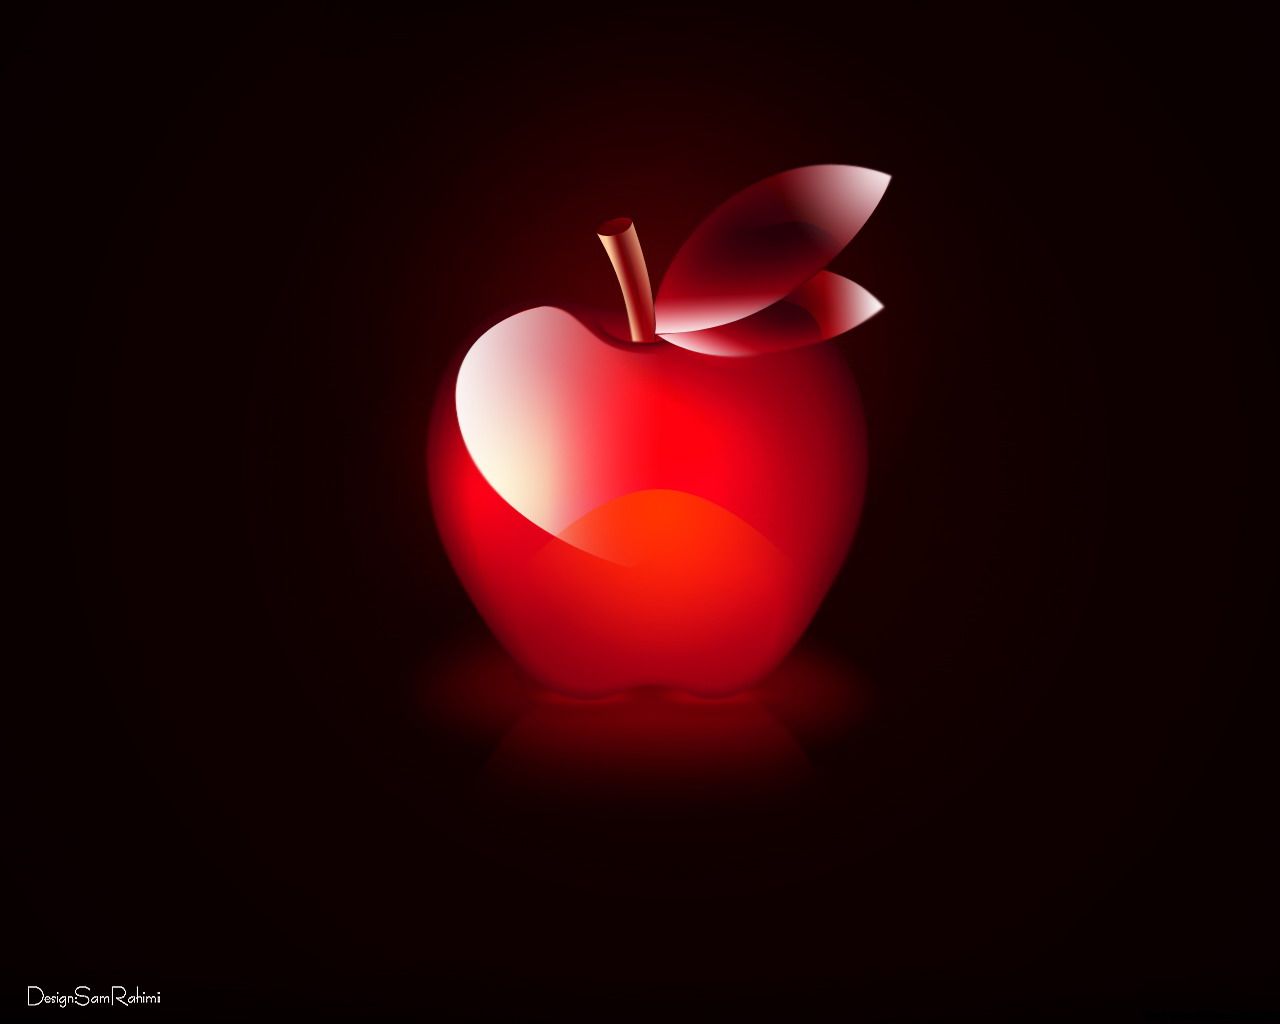 Related Wallpaper Food Fruit Glossy Red Apple